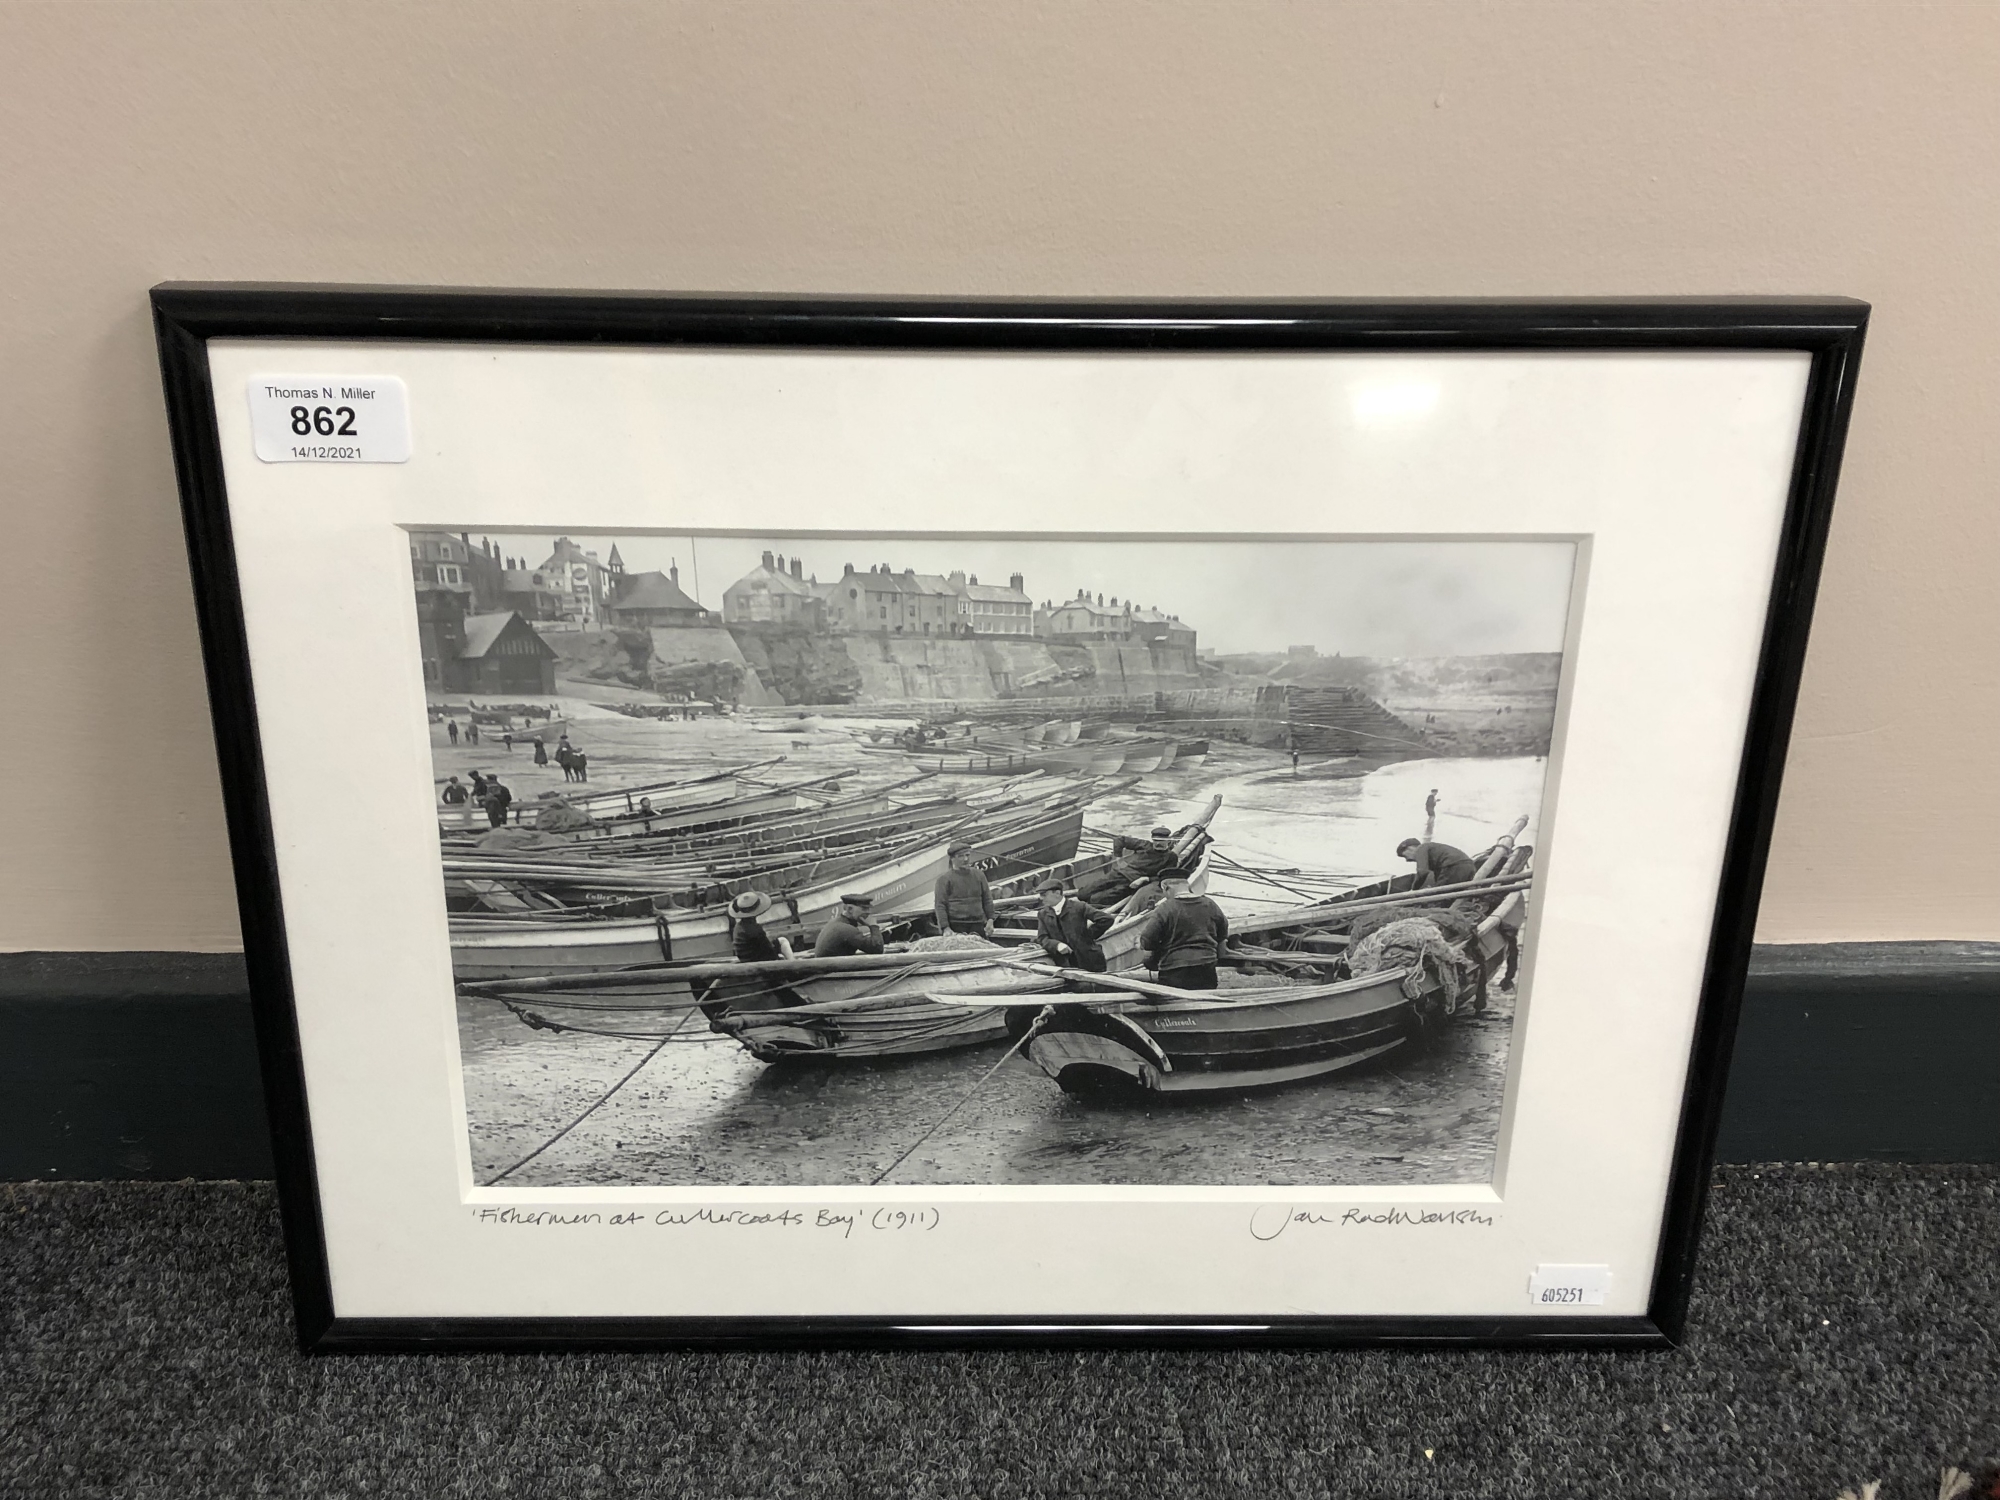 A photographic monochrome print depicting fisherman at Cullercoats Bay,